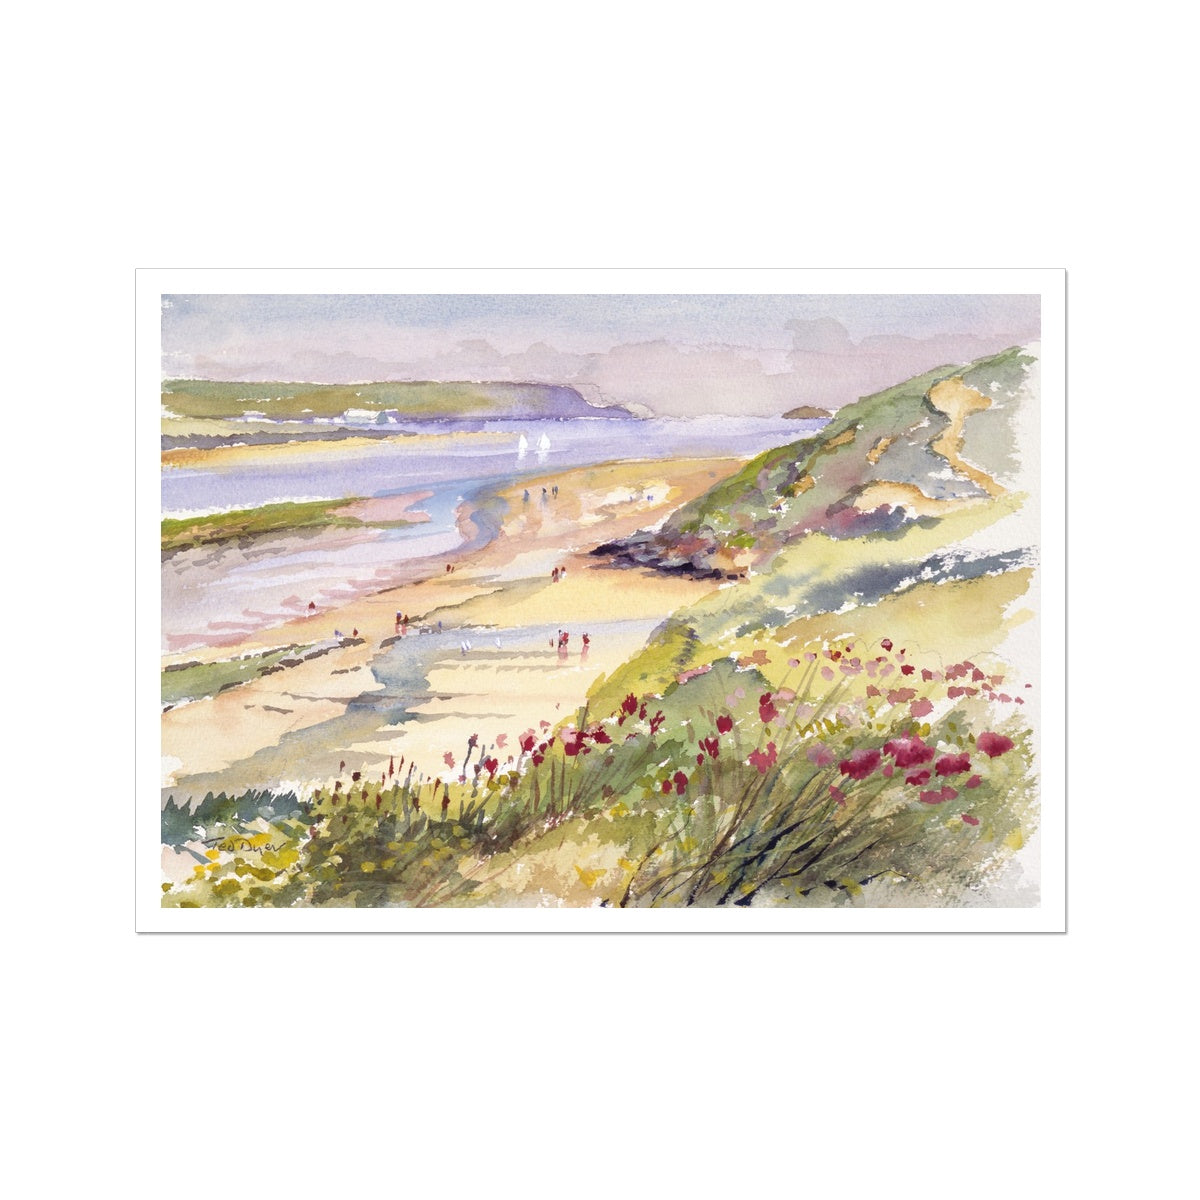 Ted Dyer Fine Art Print. Open Edition Cornish Art Print. &#39;View of the Camel Estuary and Daymer Bay from Rock&#39;. Cornwall Art Gallery